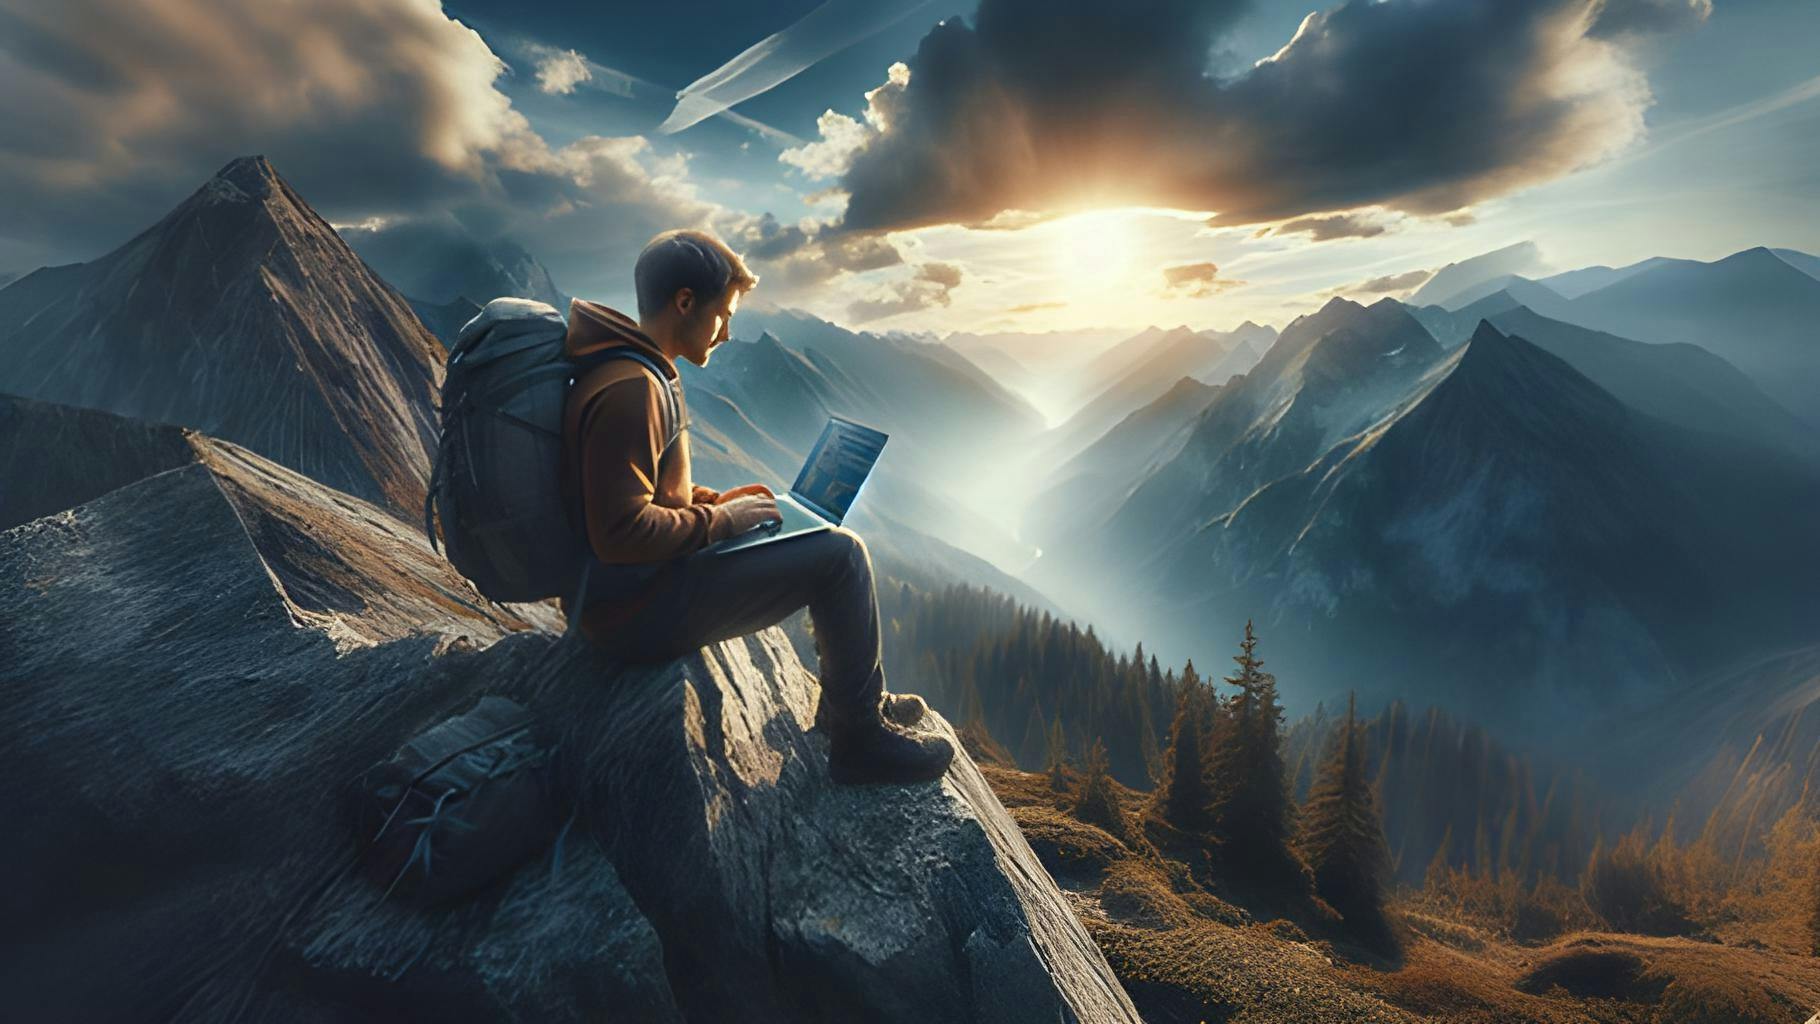 Cover Image for Coding from a Mountain Ledge